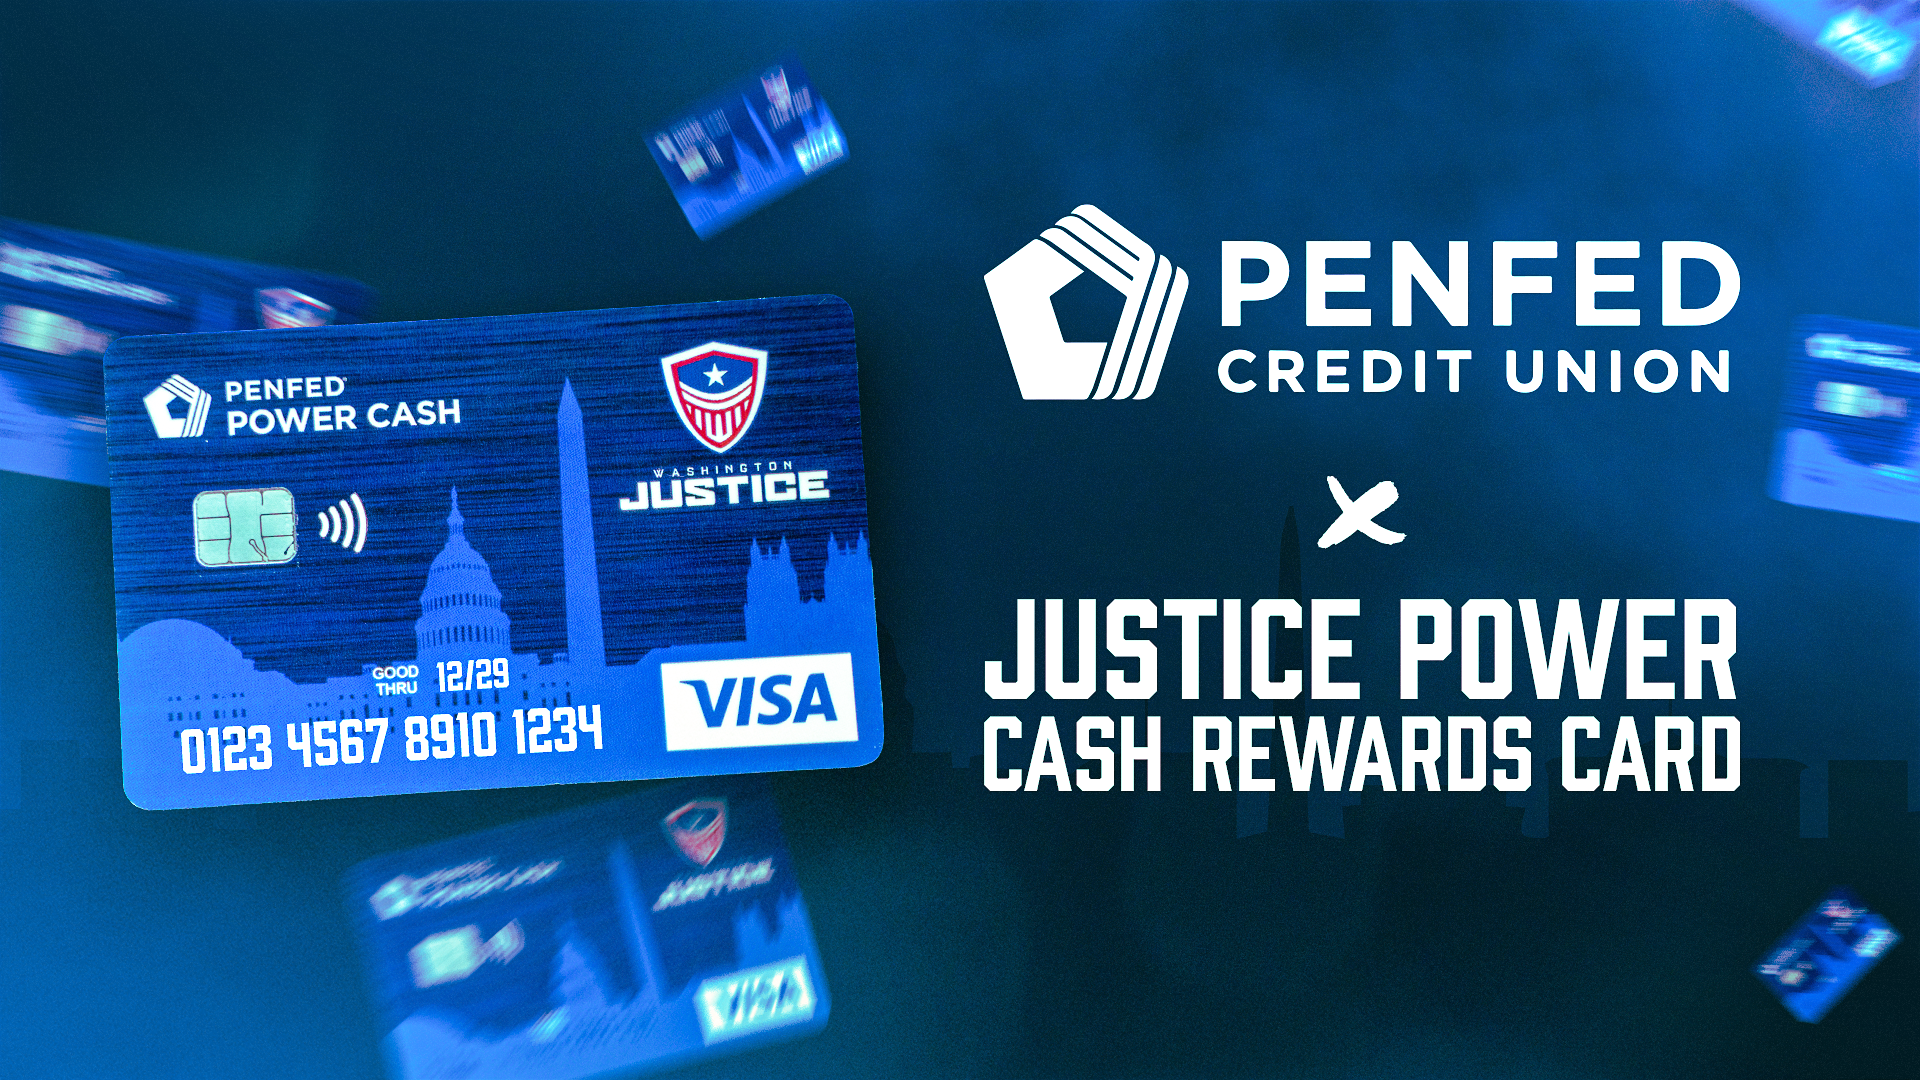 PenFed Credit Union Launches Washington Justice Branded Power Cash